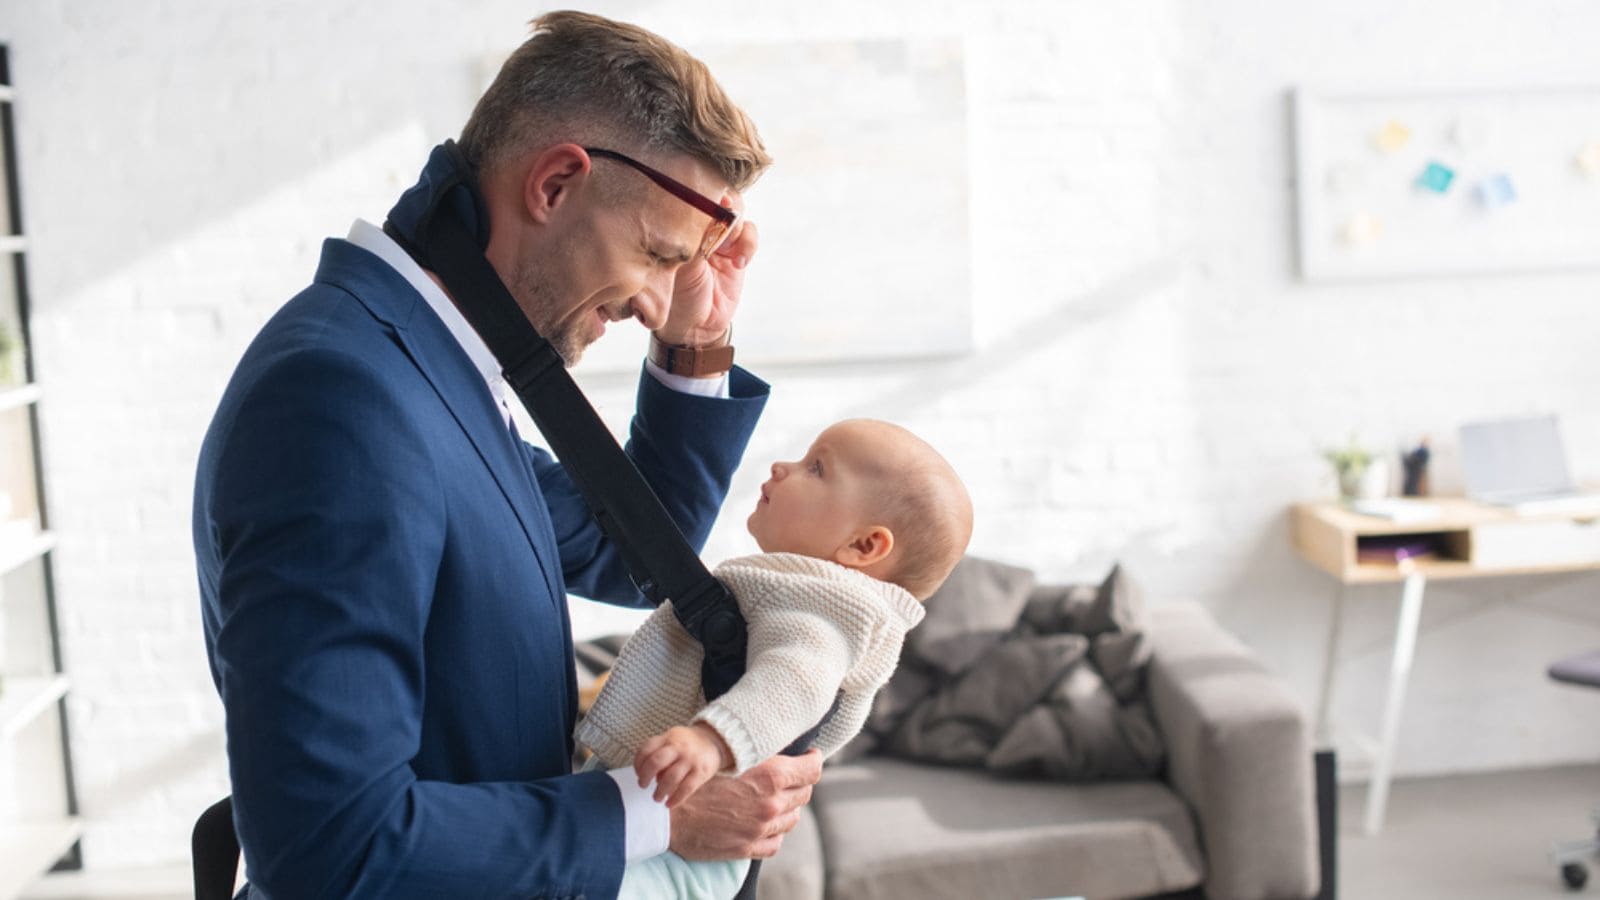 Cheerful businessman holding glasses and looking at infant